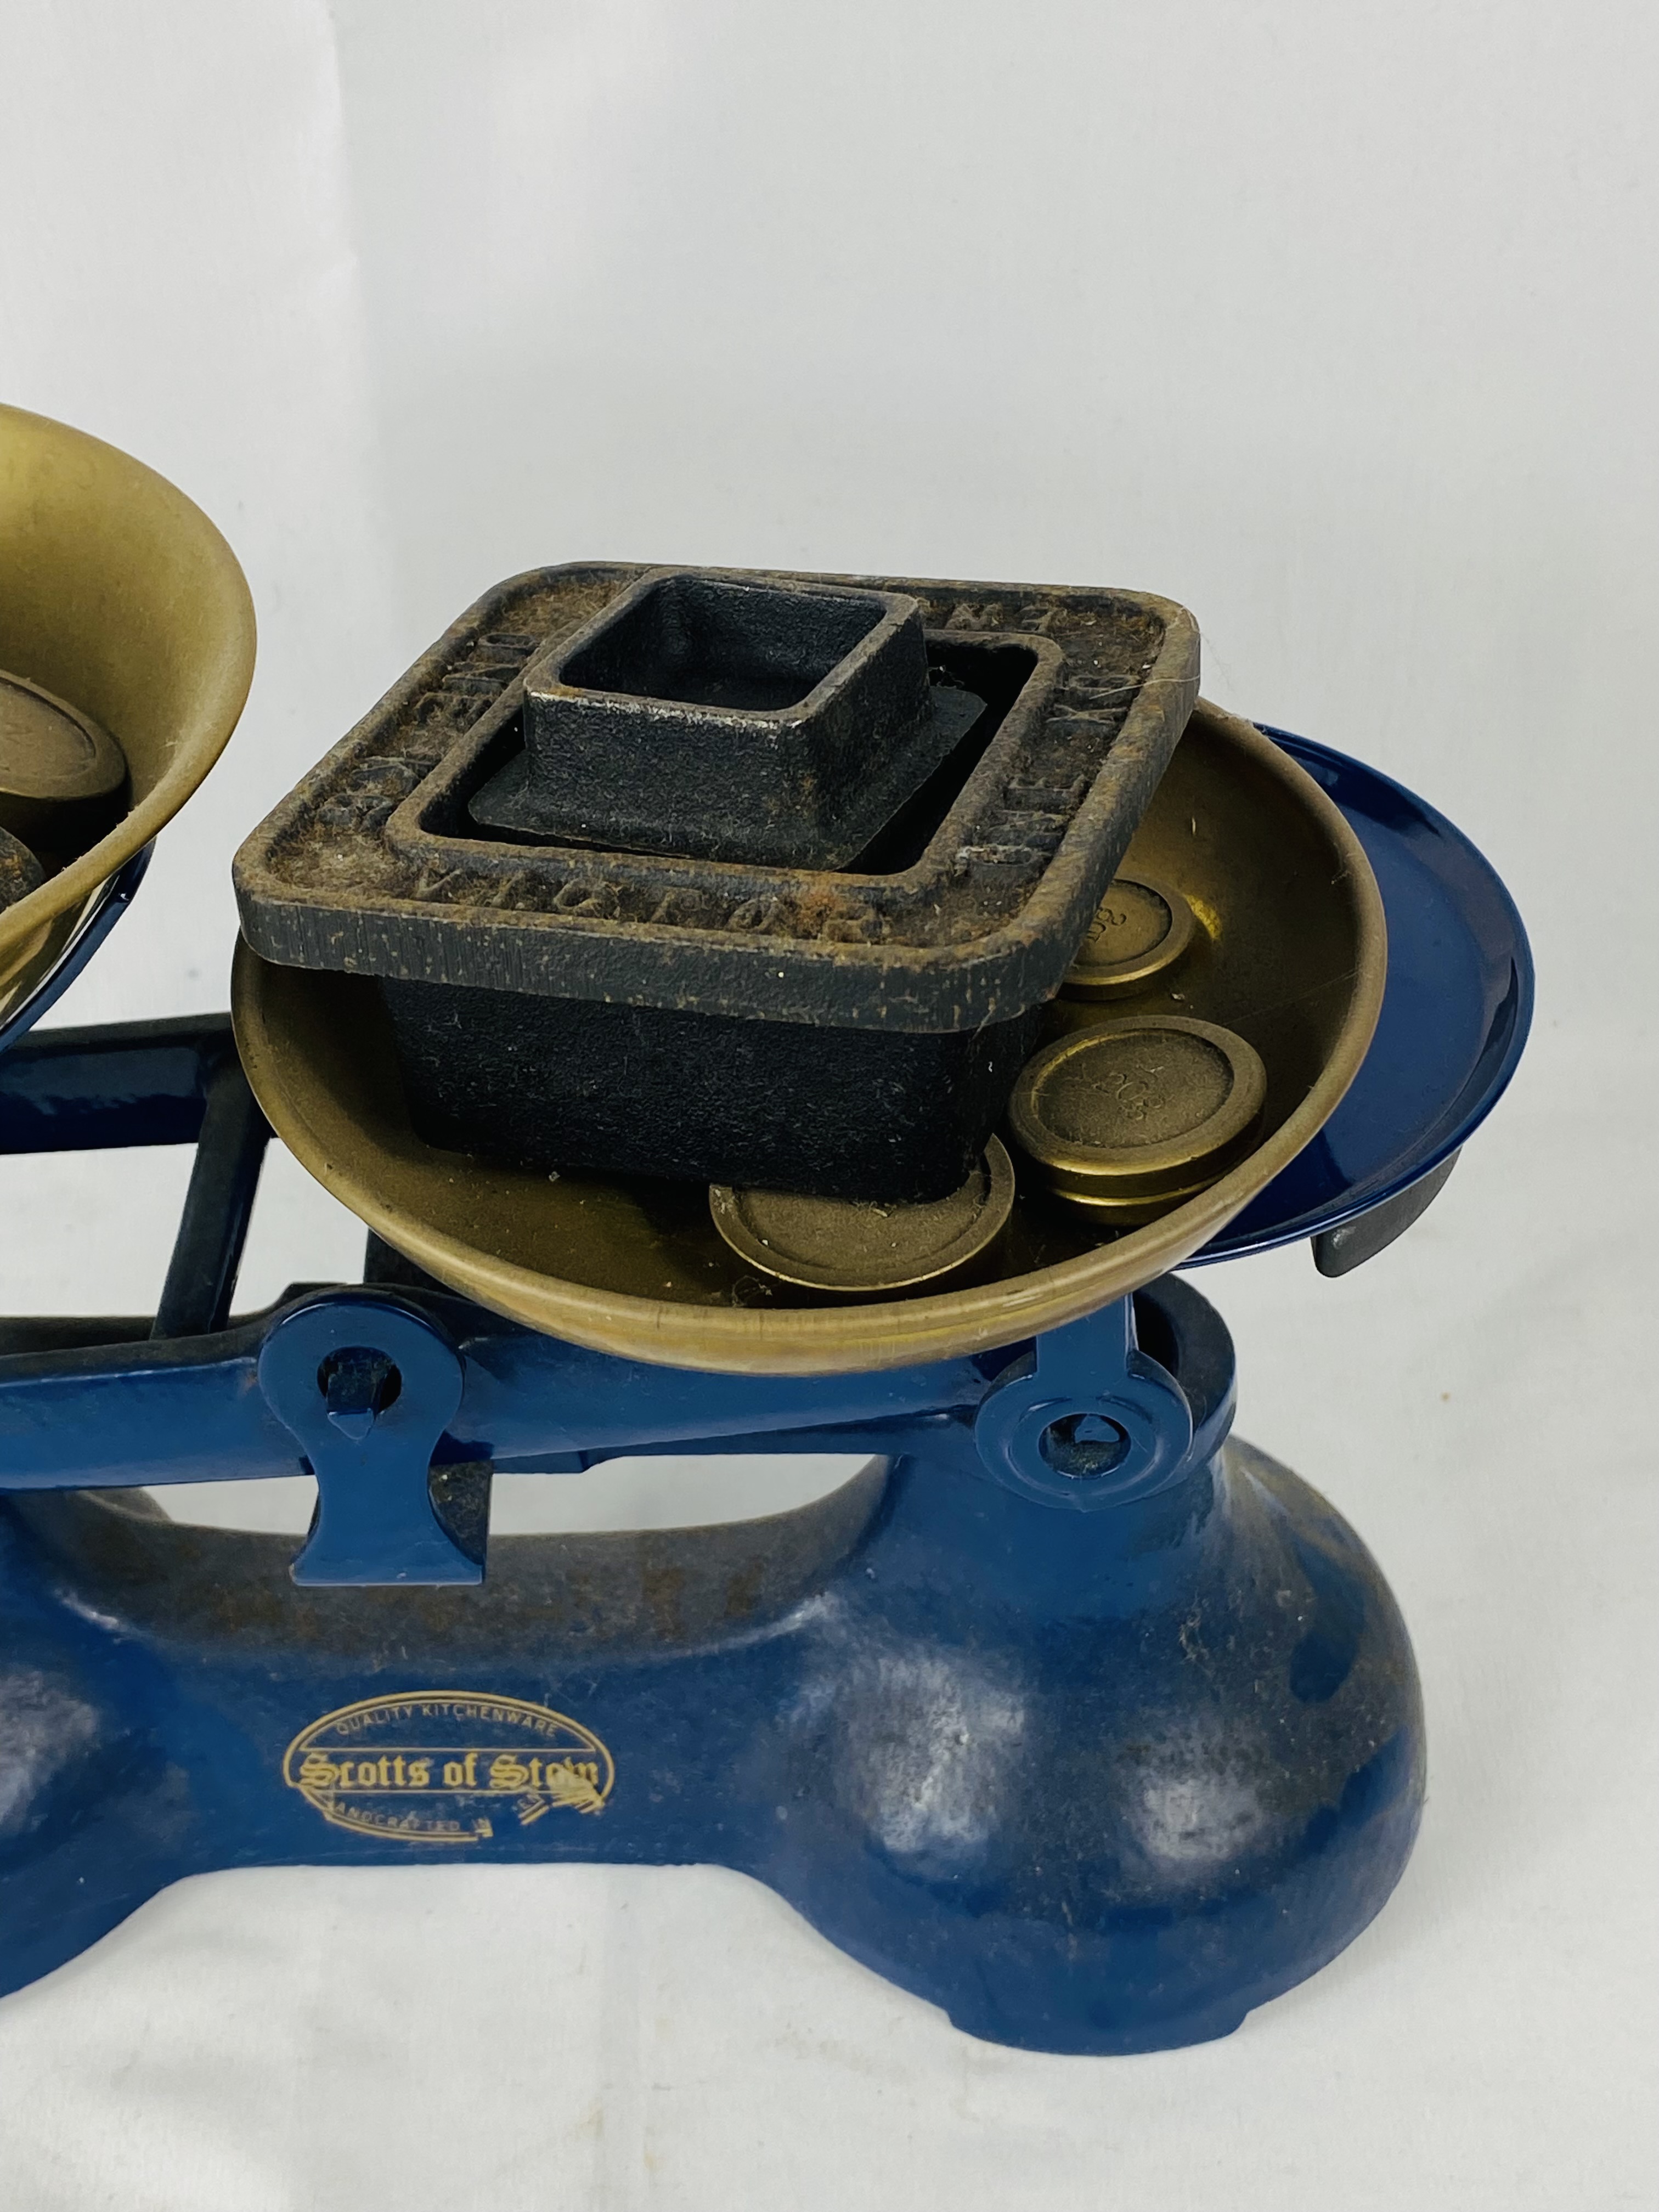 Scotts of Stow kitchen scales - Image 4 of 4